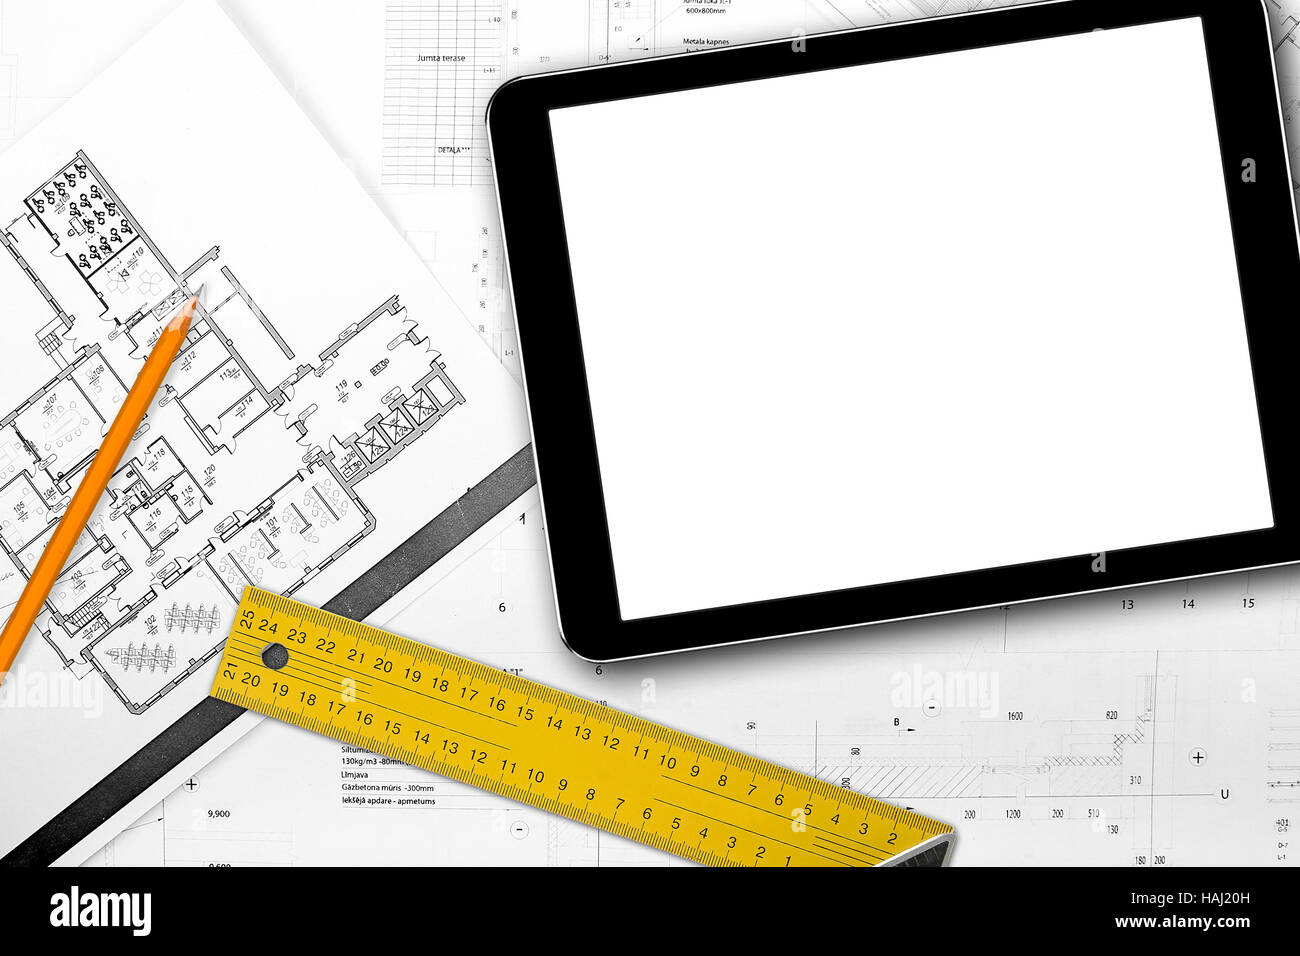 blank tablet and tools on house project blueprints Stock Photo